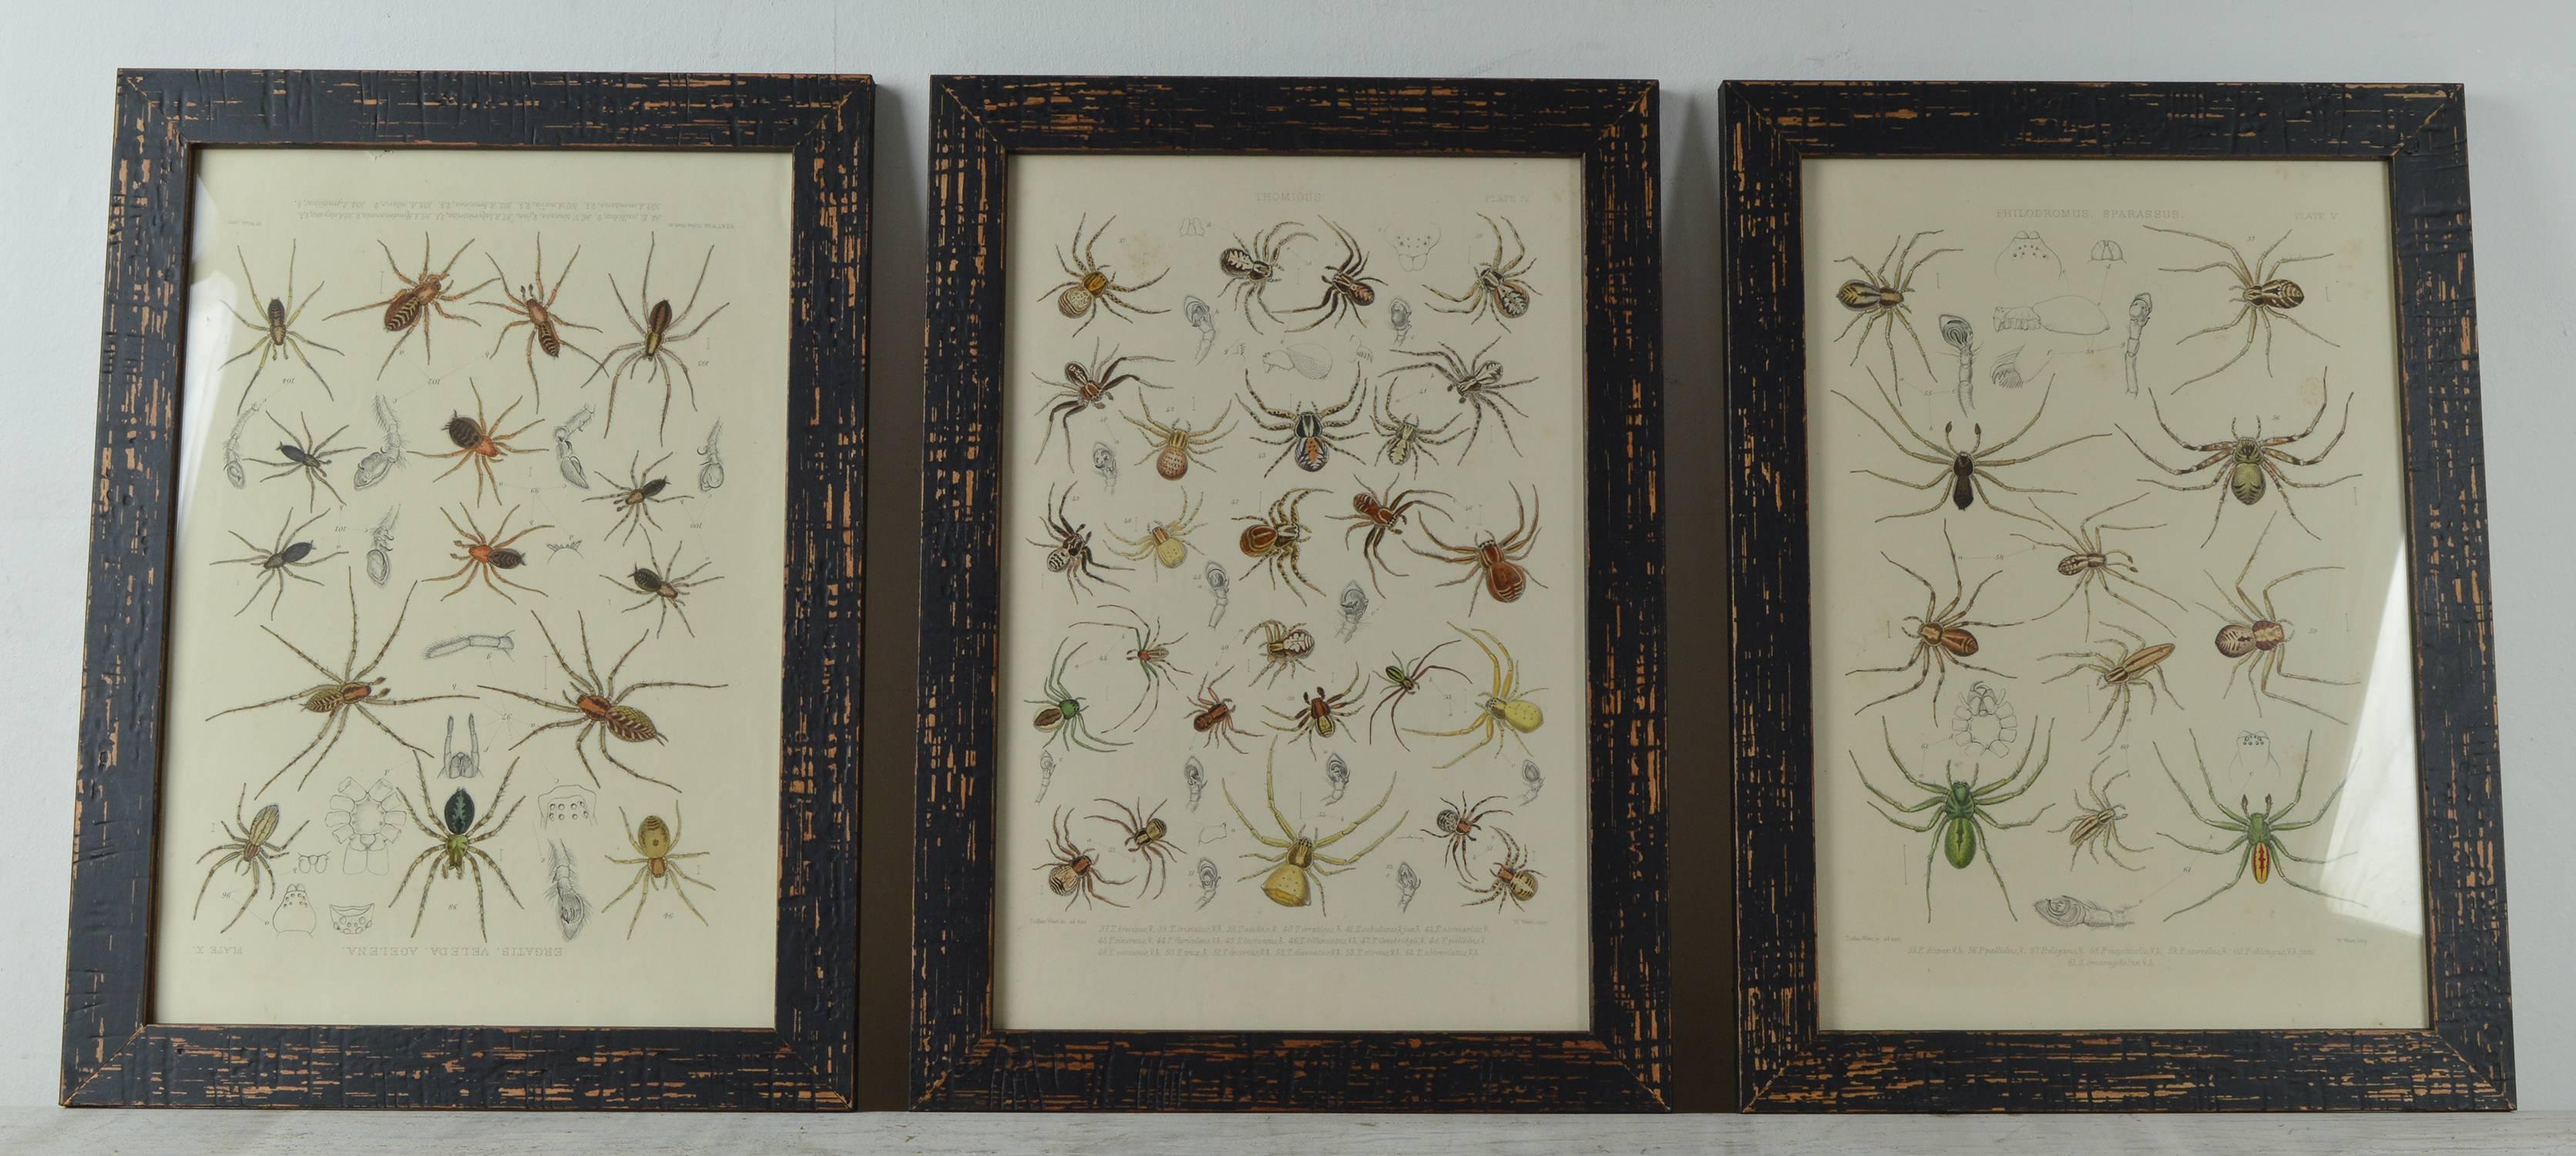 Wonderful set of 12 spider prints.

Steel Engravings by Tuffen West with original colour.

Published 1861.

Presented in slightly distressed black painted frames.